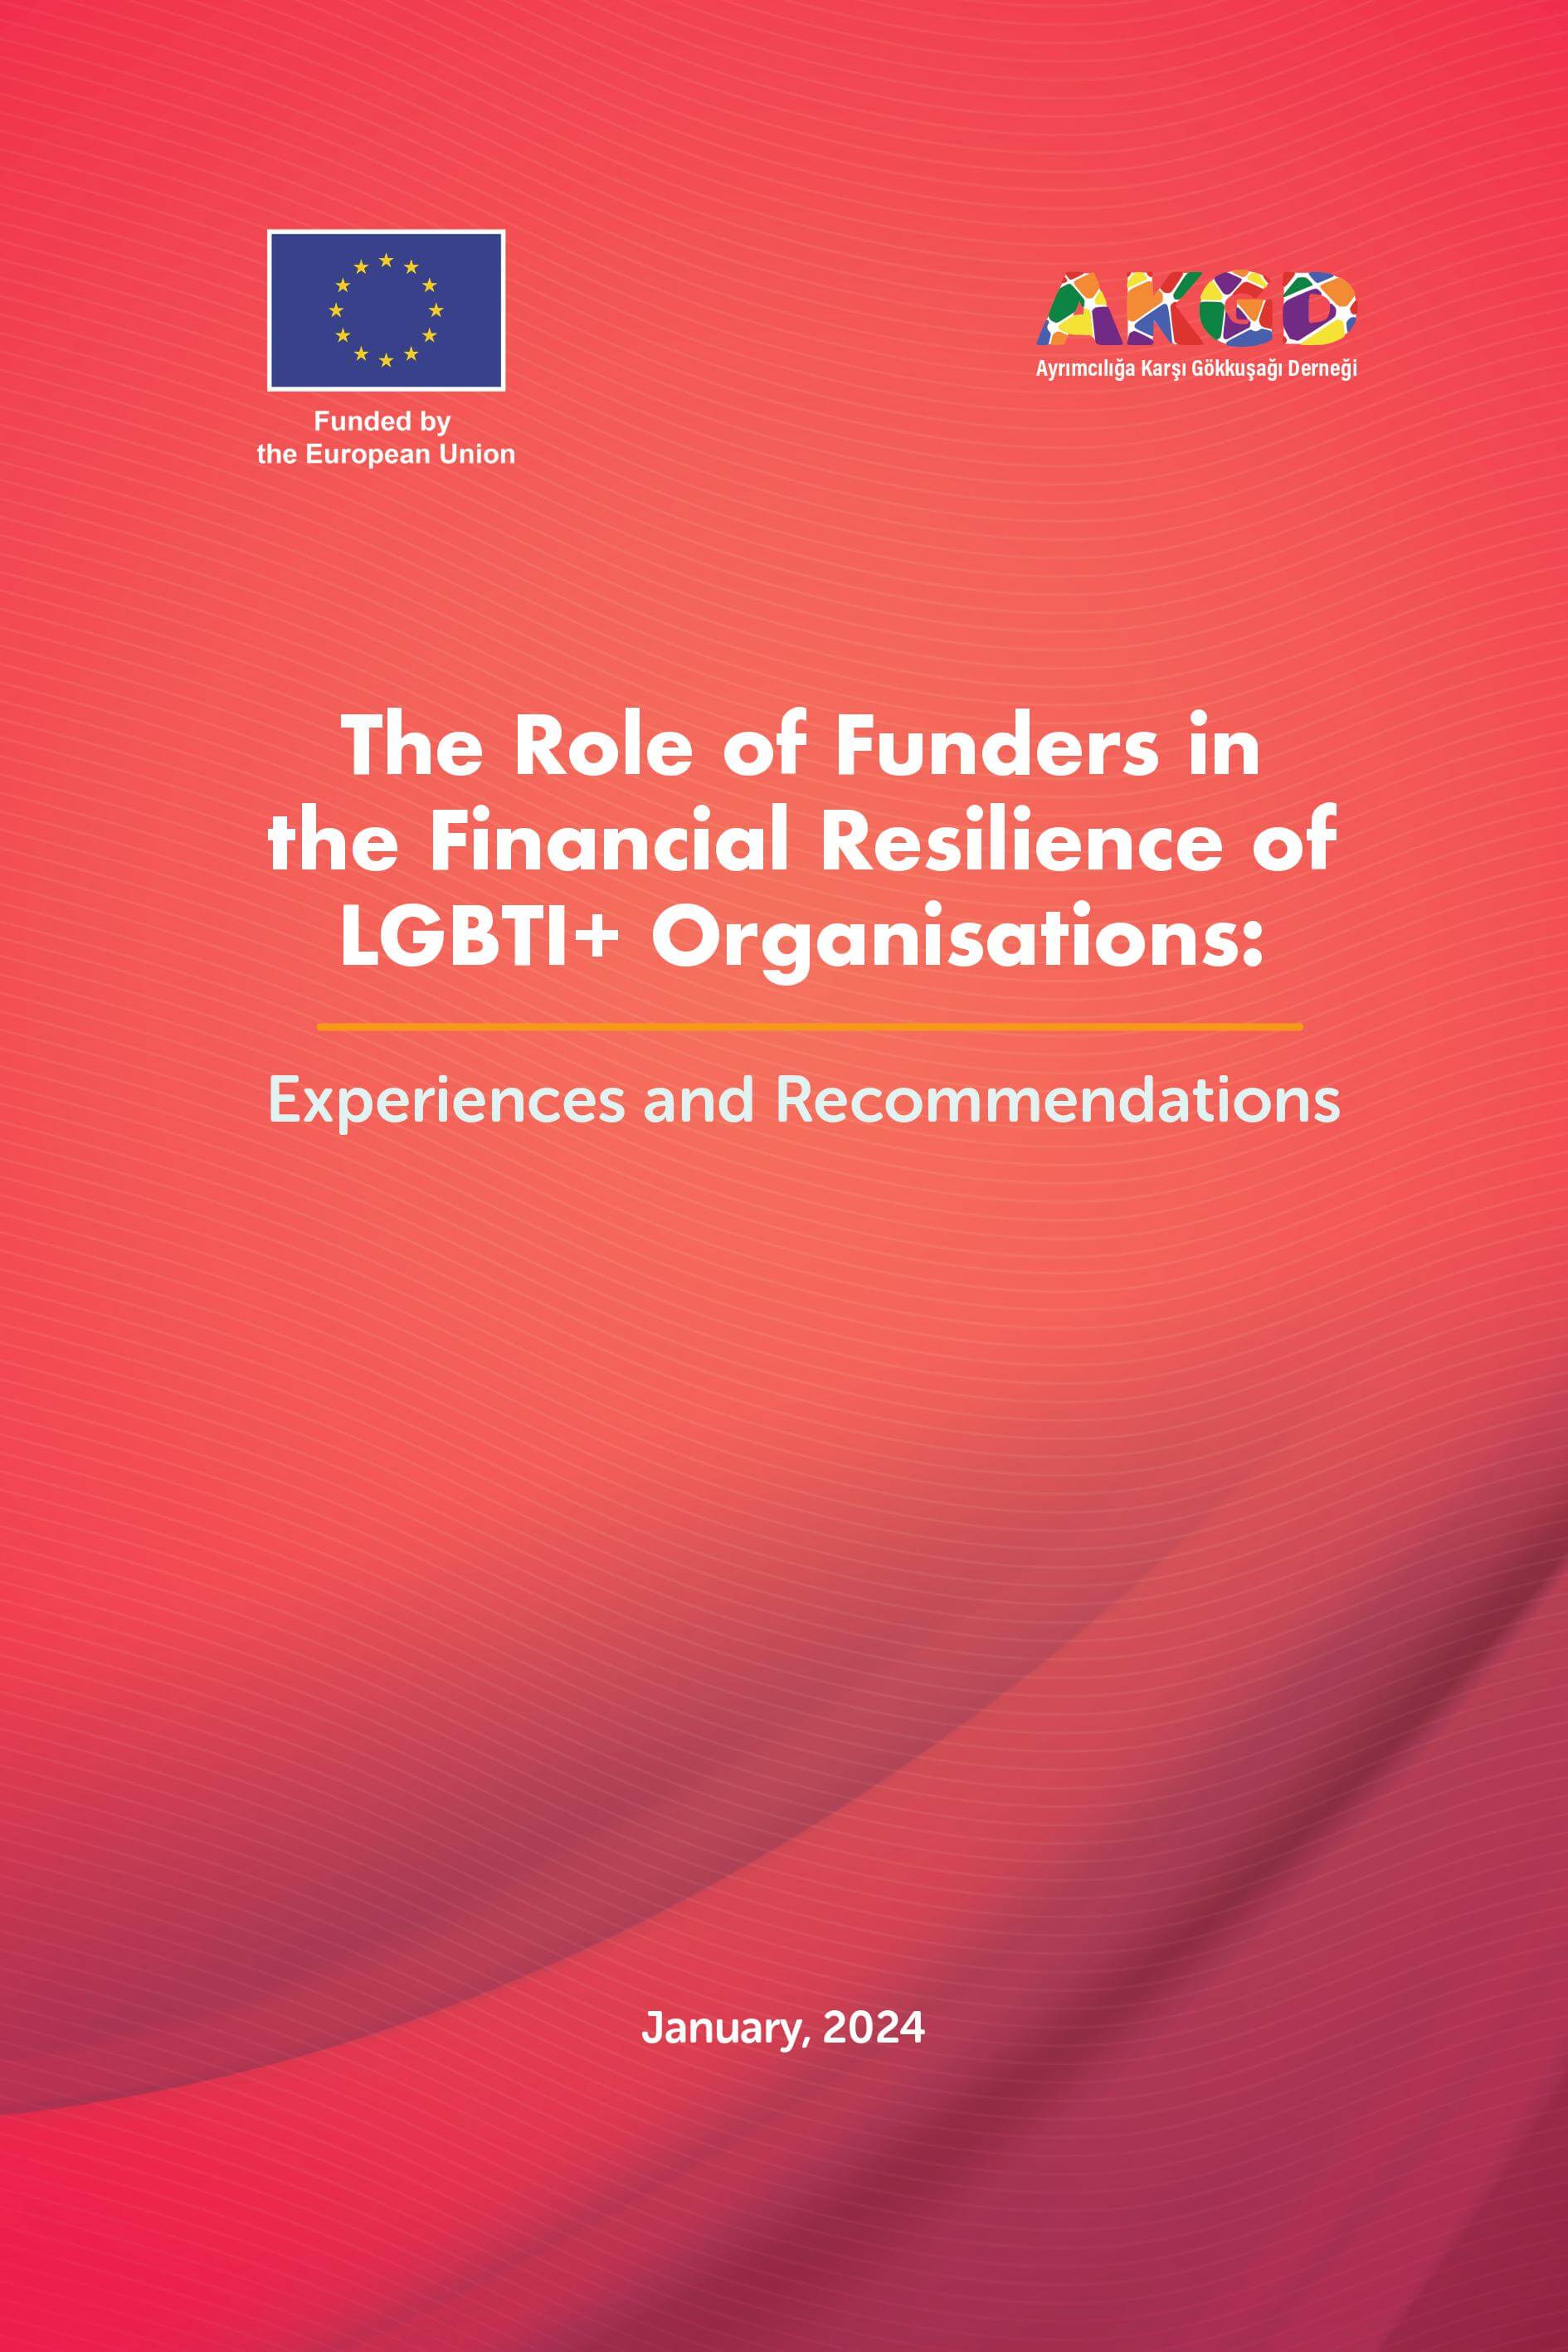 The Role of Funders in the Financial Resilience of LGBTI+ Organisations: Experiences and Recommendations - Rainbow Association Against Discrimination